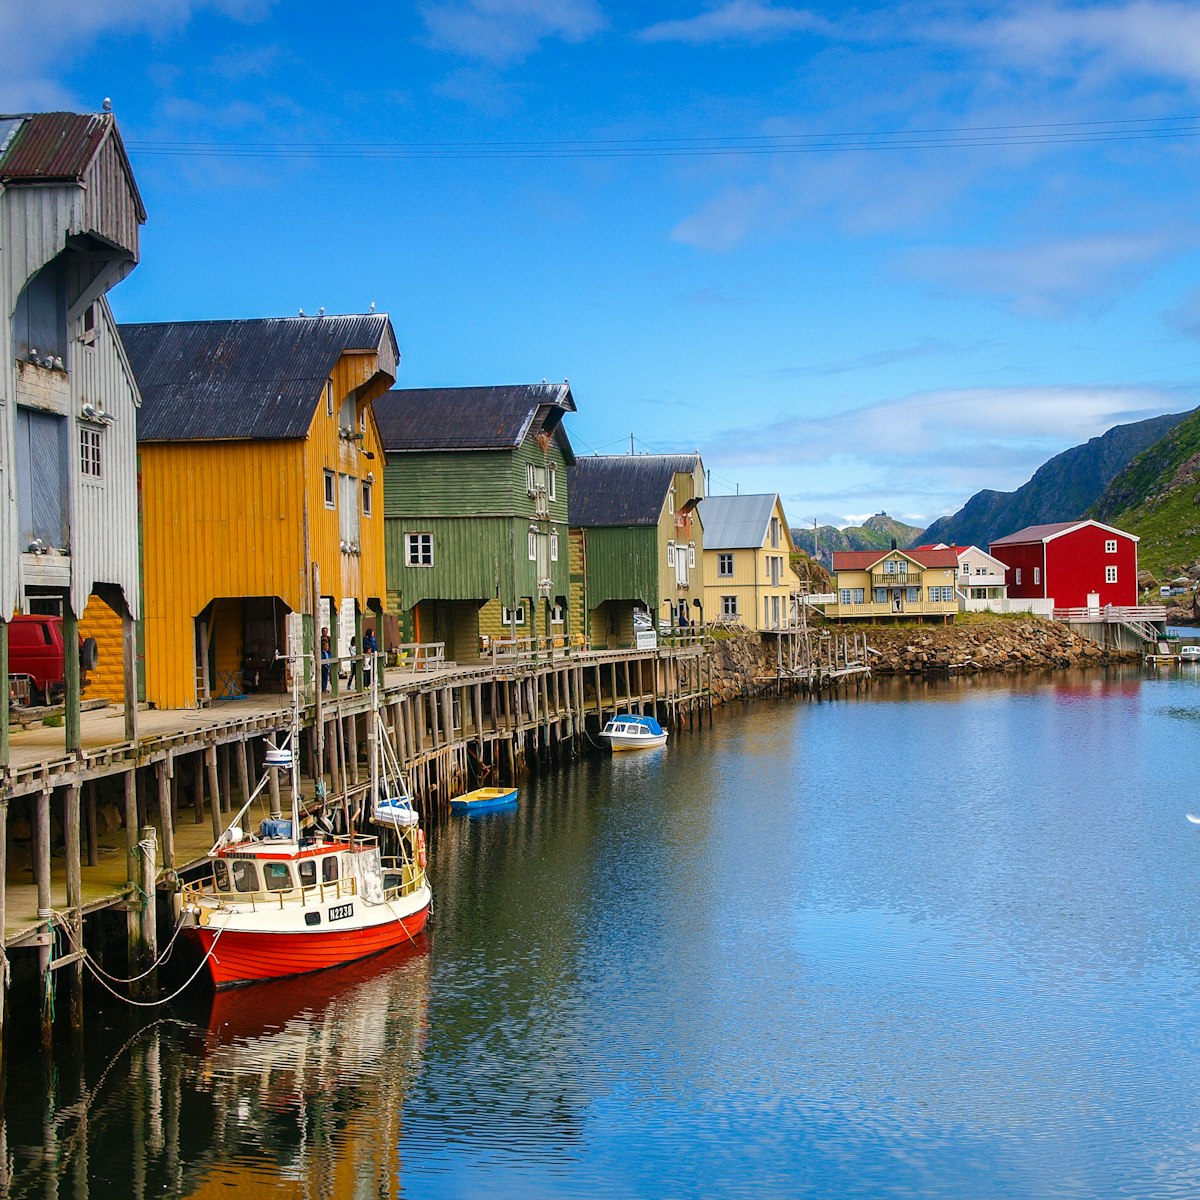 harbour boat house norway nyksund; Shutterstock ID 120028675; Your name (First / Last): Josh Vogel; Project no. or GL code: 56530; Network activity no. or Cost Centre: Online-Design; Product or Project: 65050/7529/Josh Vogel/LP.com Destination Galleries